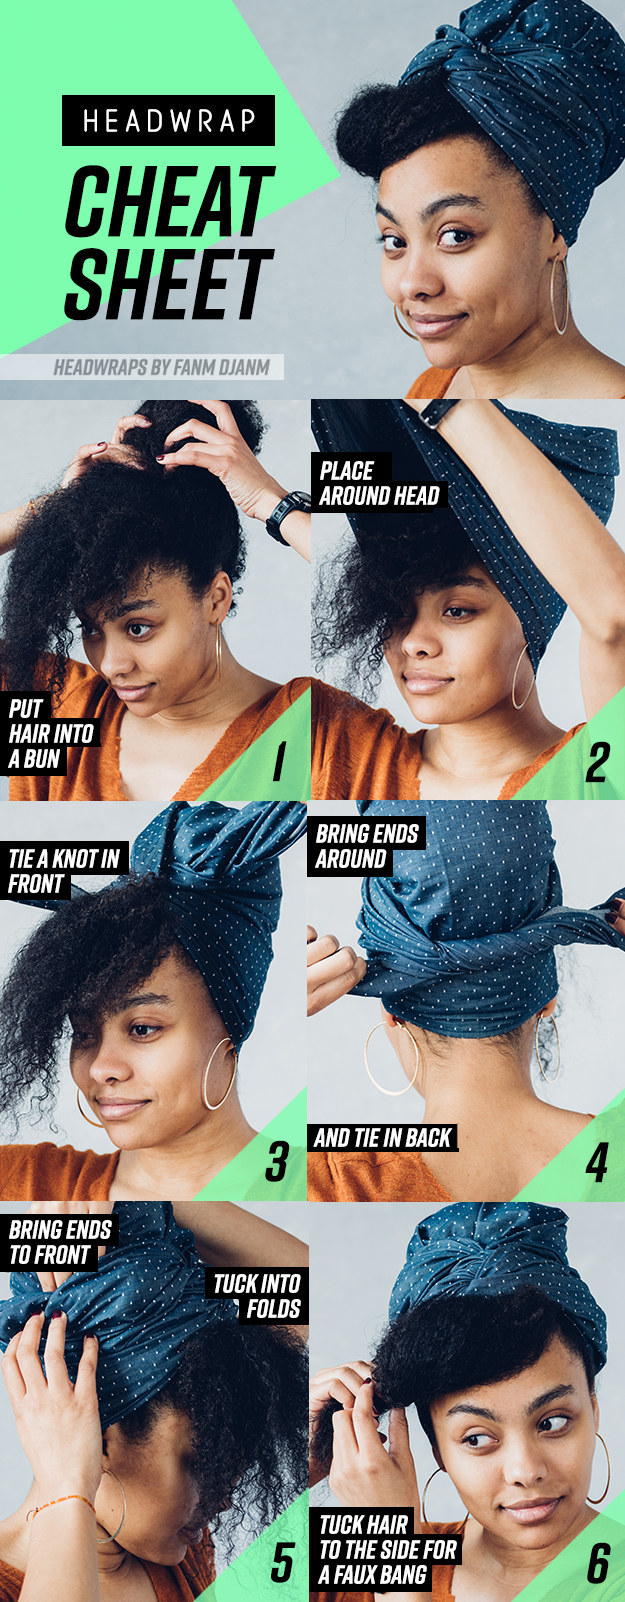 Photos showing six steps: Put hair into a bun, place wrap around head, tie knot in front, bring ends around, bring ends to front and tuck into folds, and tuck hair to the side for a faux bang